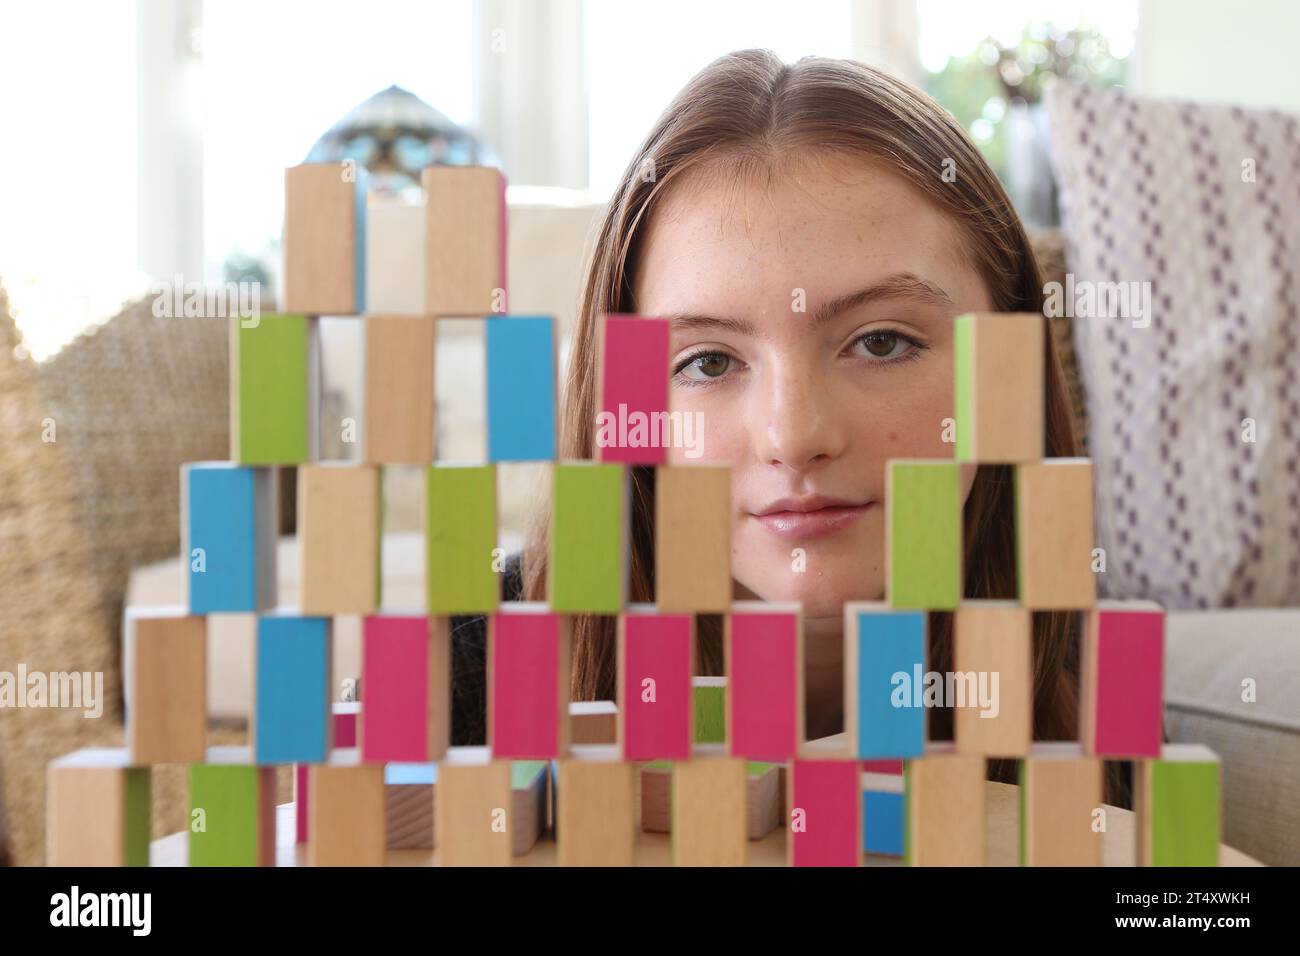 Teenage girl looking through a wall of wooden blocks with gaps, thoughtful and contemplating what she has built Stock Photo